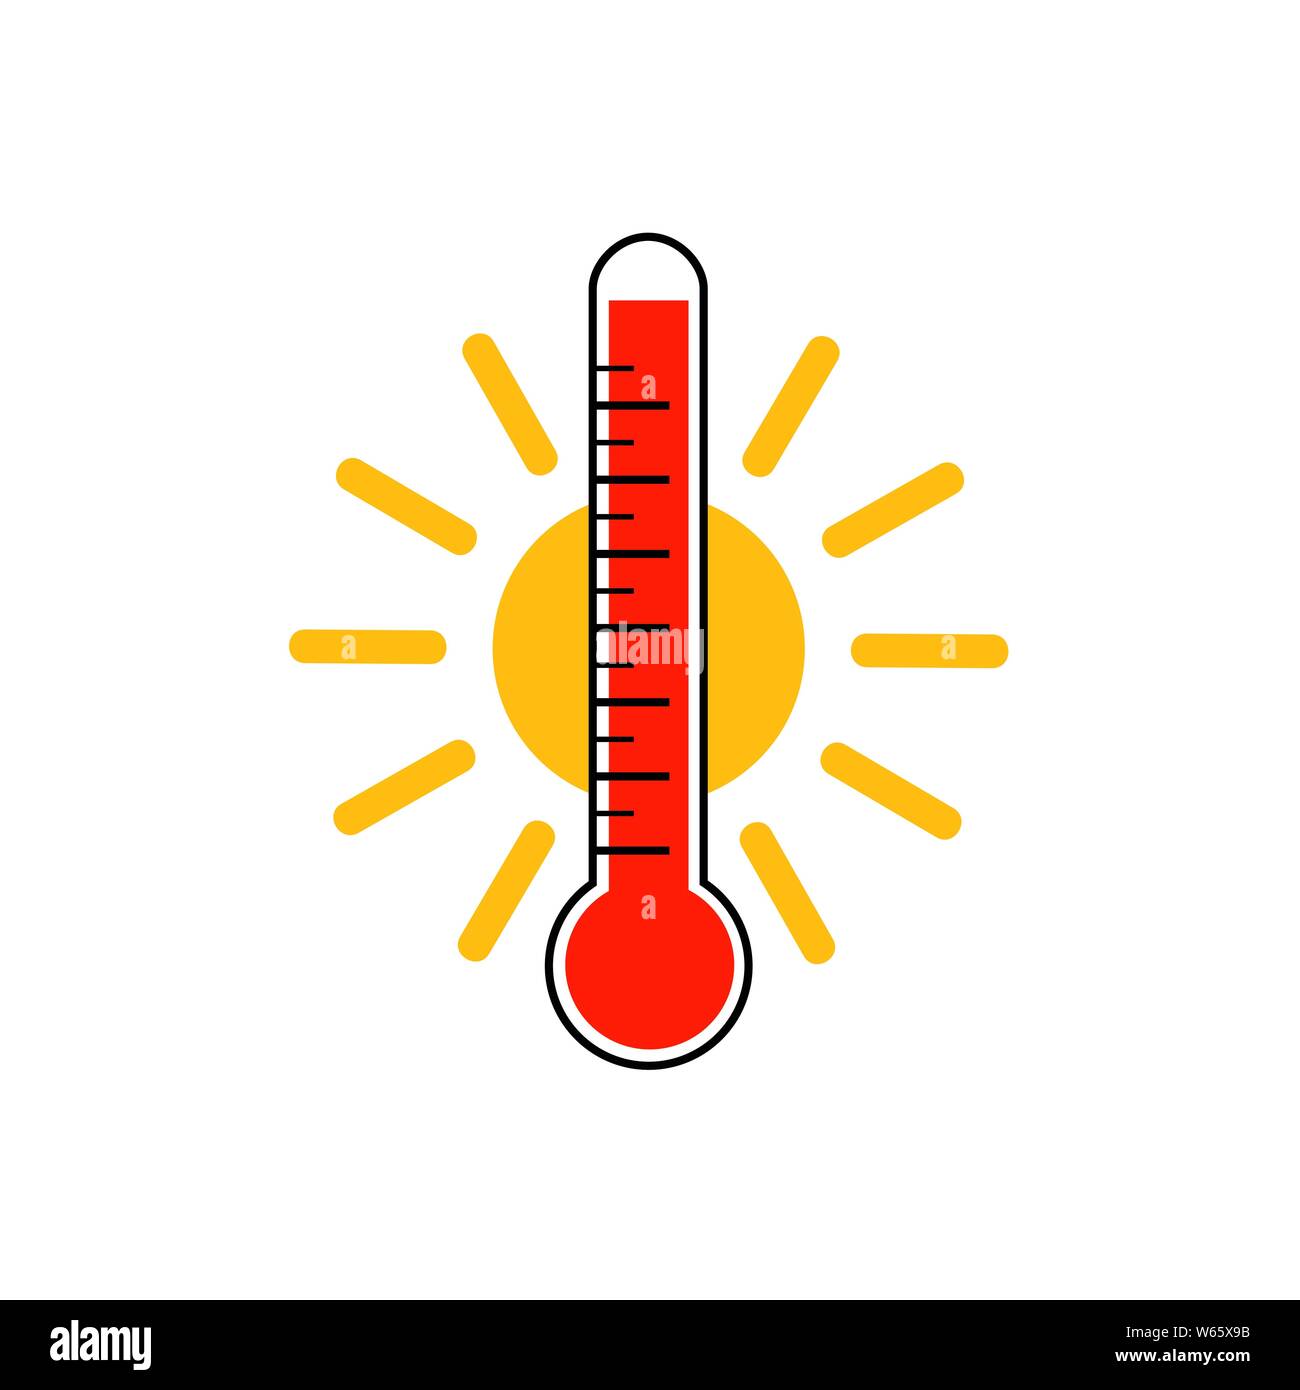 heat thermometer icon and sun symbol vector illustration EPS10 Stock Vector